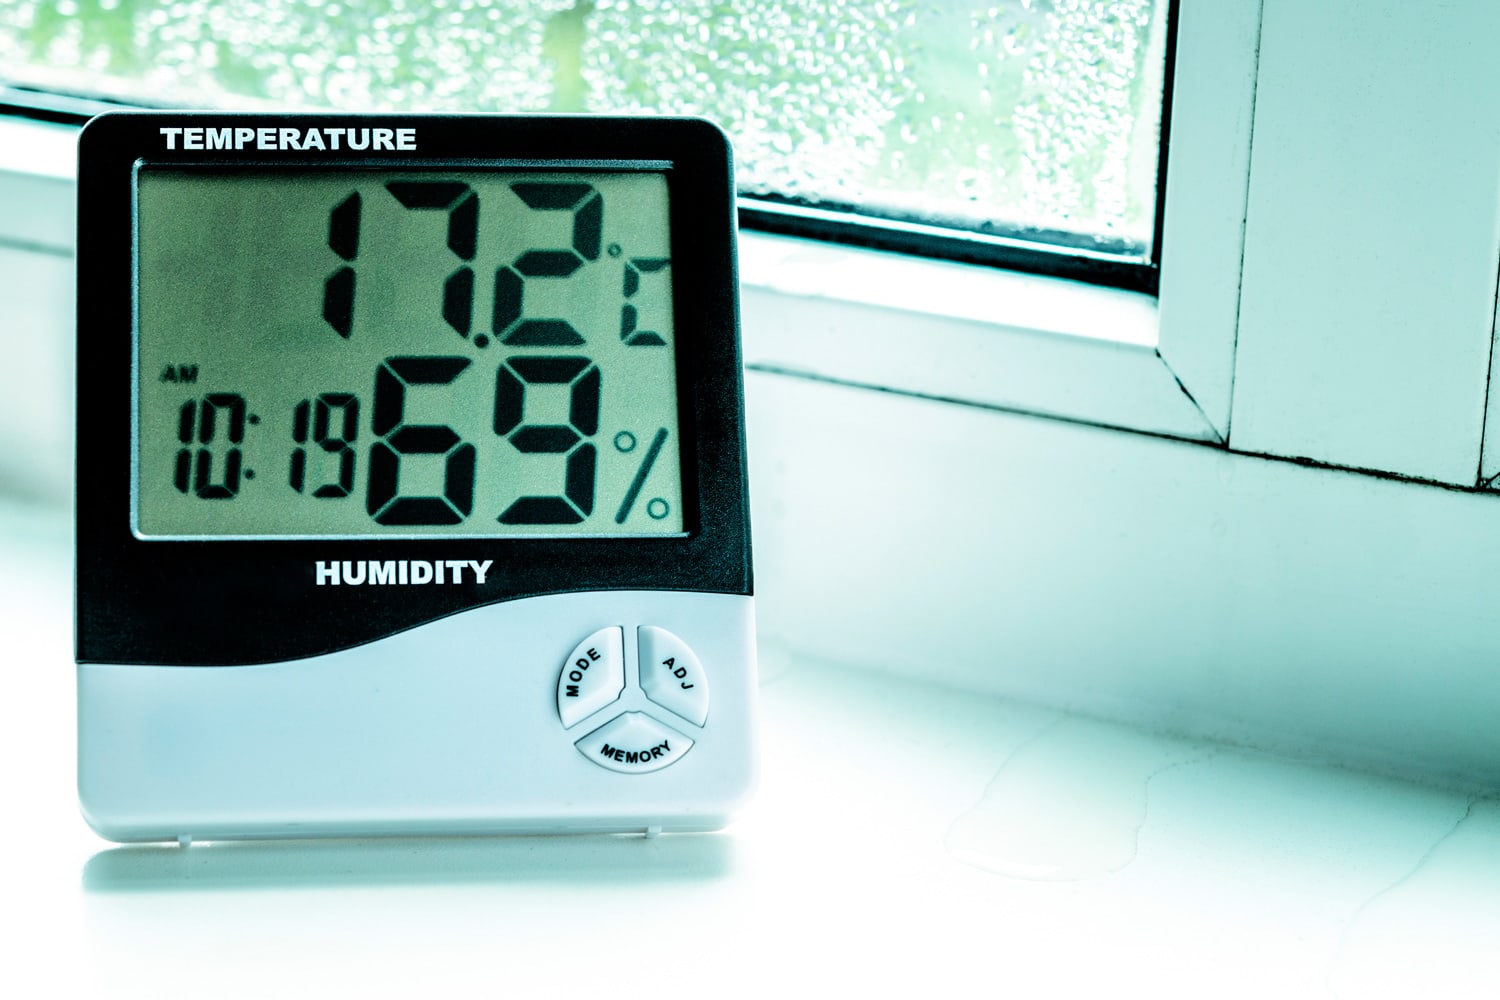 Measurement of temperature and humidity in the room. Plastic windows. Condensate